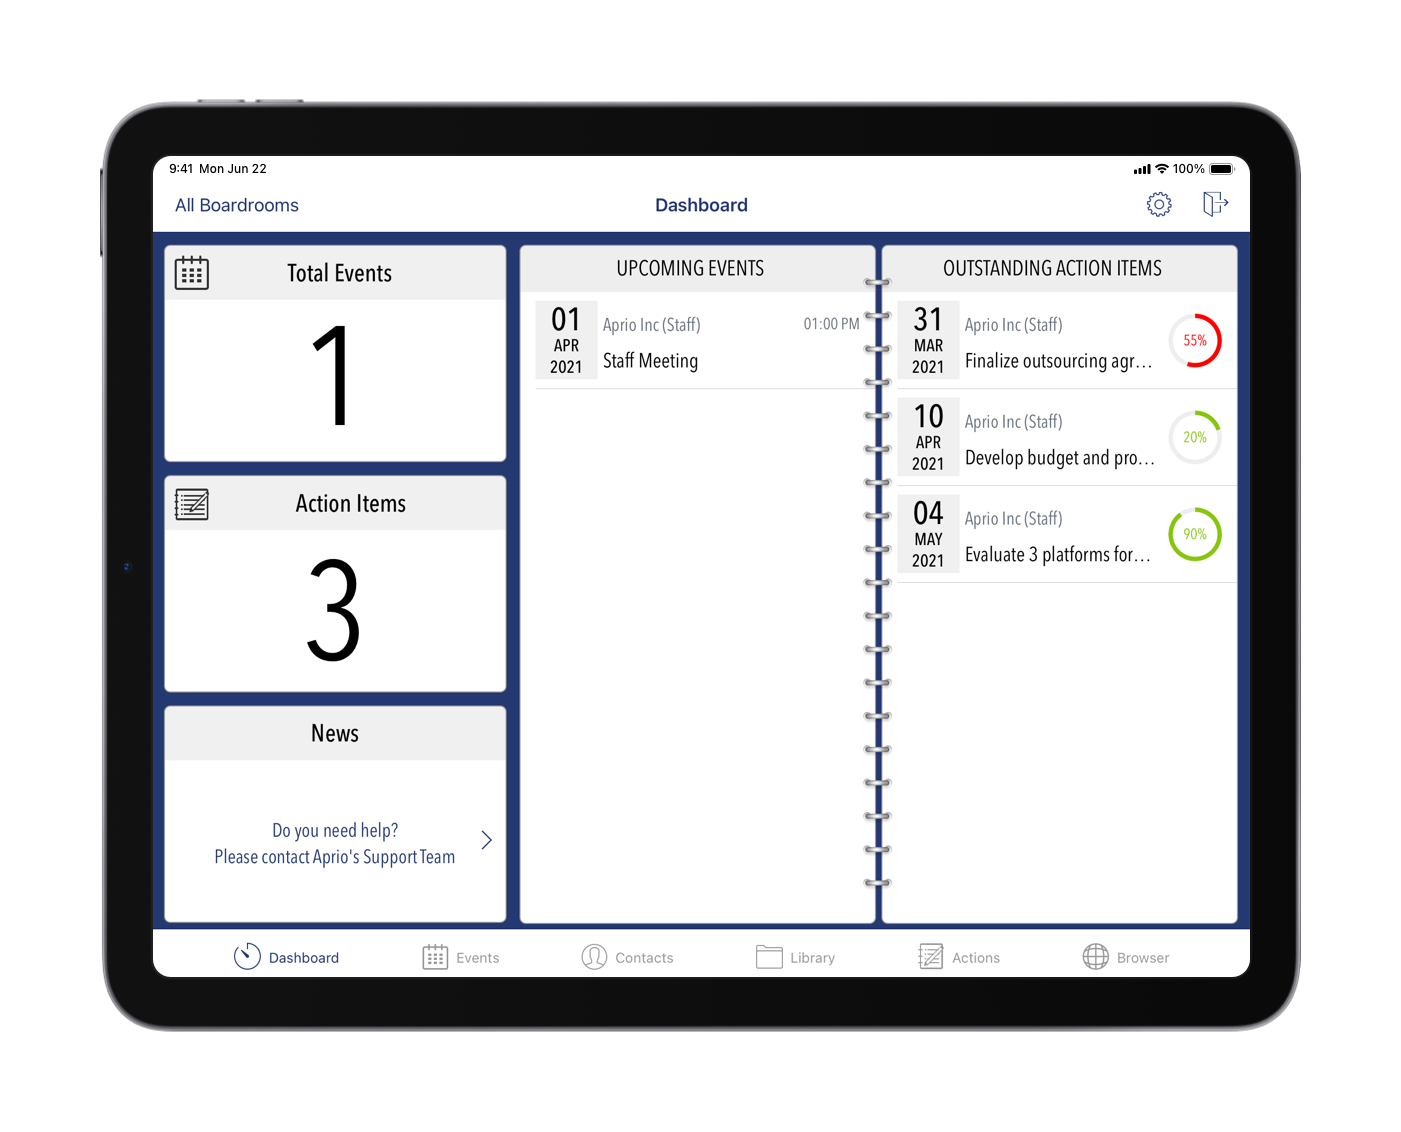 The dashboard gives you quick access to your board materials and upcoming meetings, important announcements from your organizations, or outstanding tasks that need to be completed.